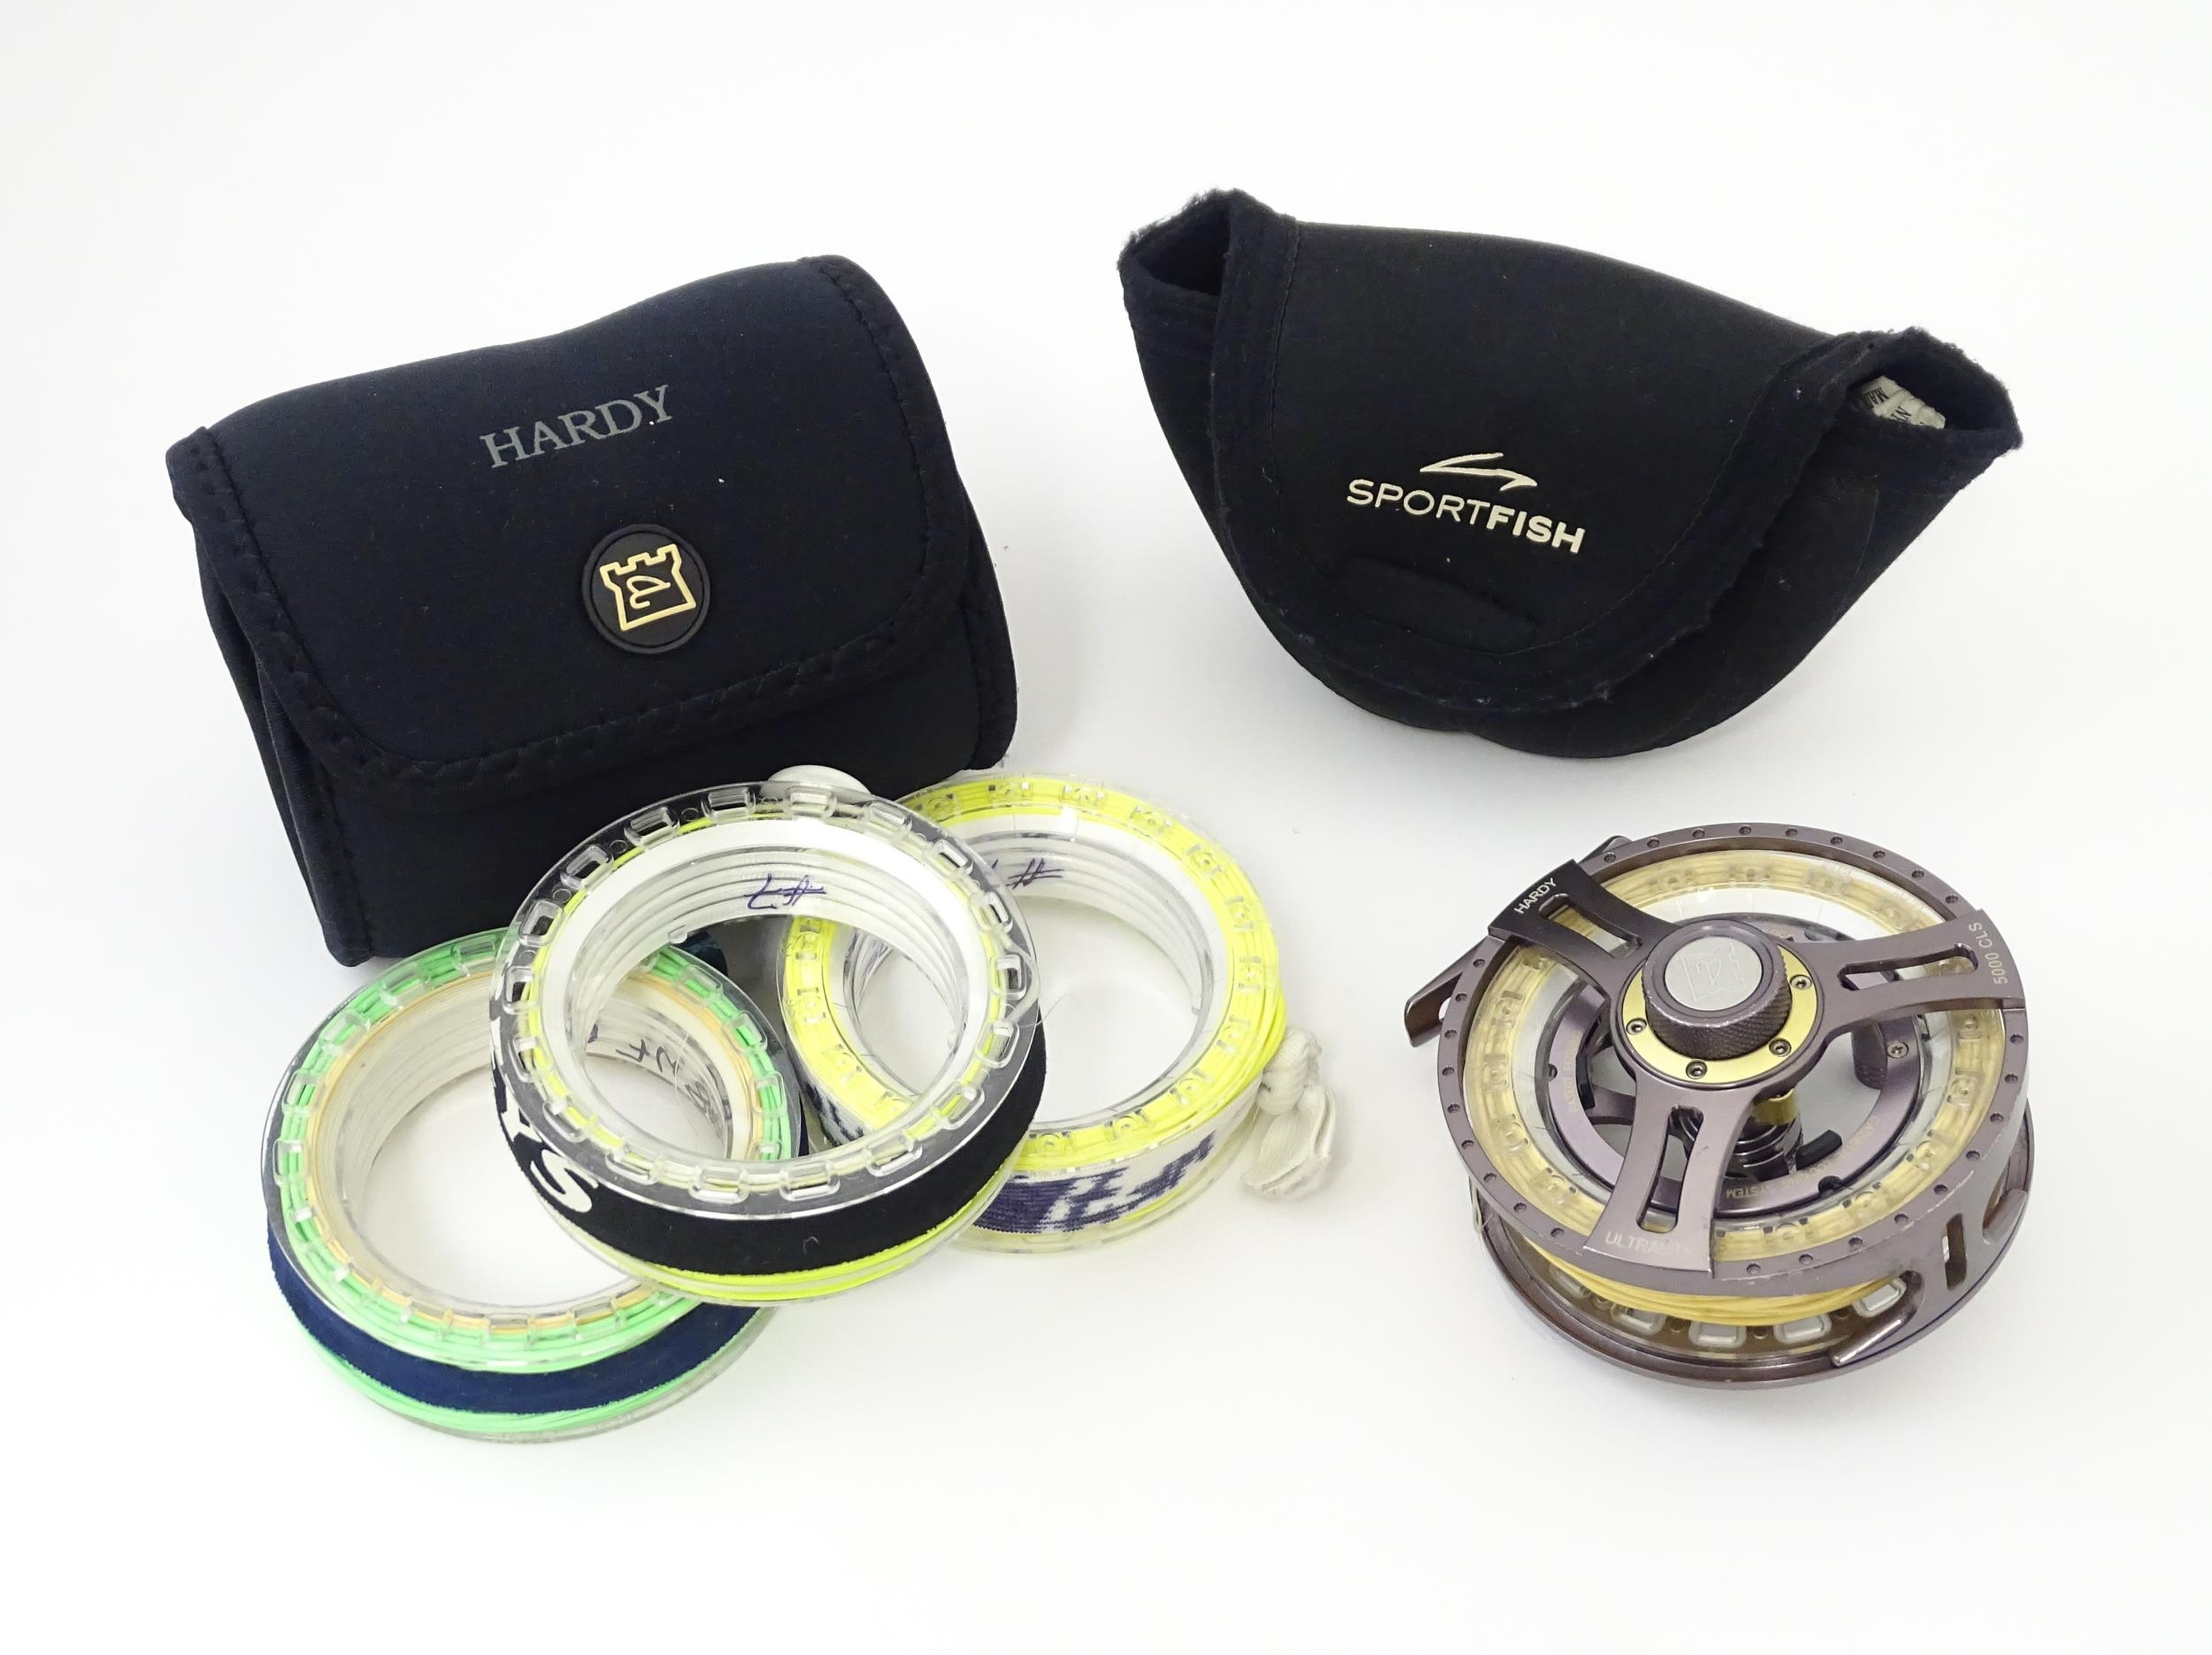 Fishing : a Hardy Ultralite 5000 CLS centrepin fly reel, together with a Hardy's neoprene case